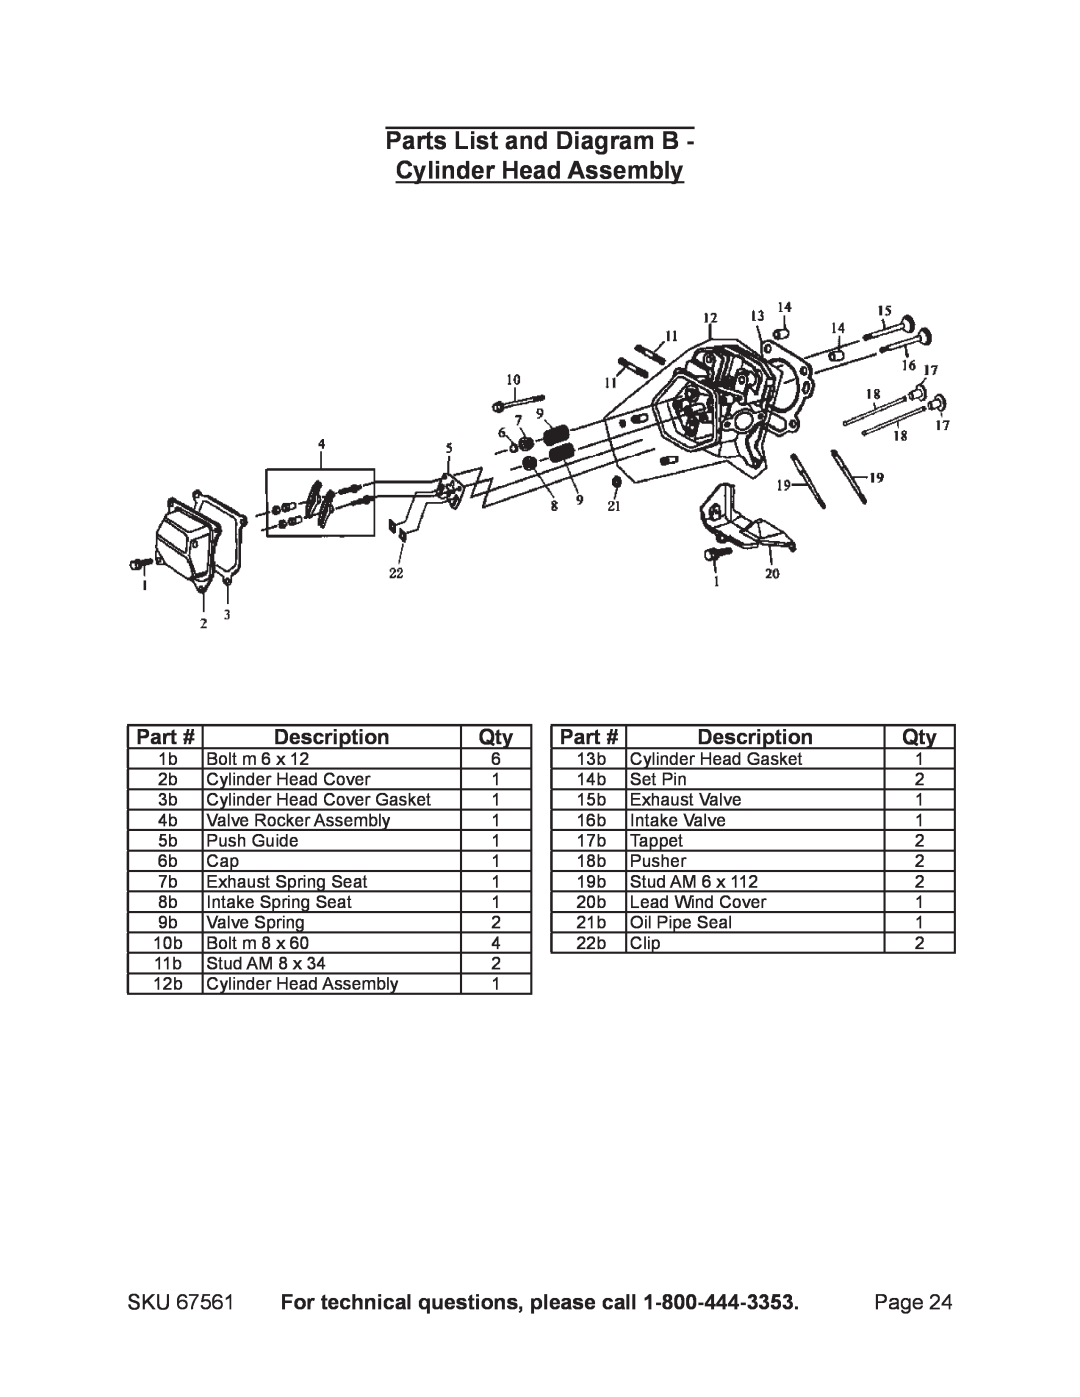 Chicago Electric 67561 Parts List and Diagram B Cylinder Head Assembly, Description, For technical questions, please call 